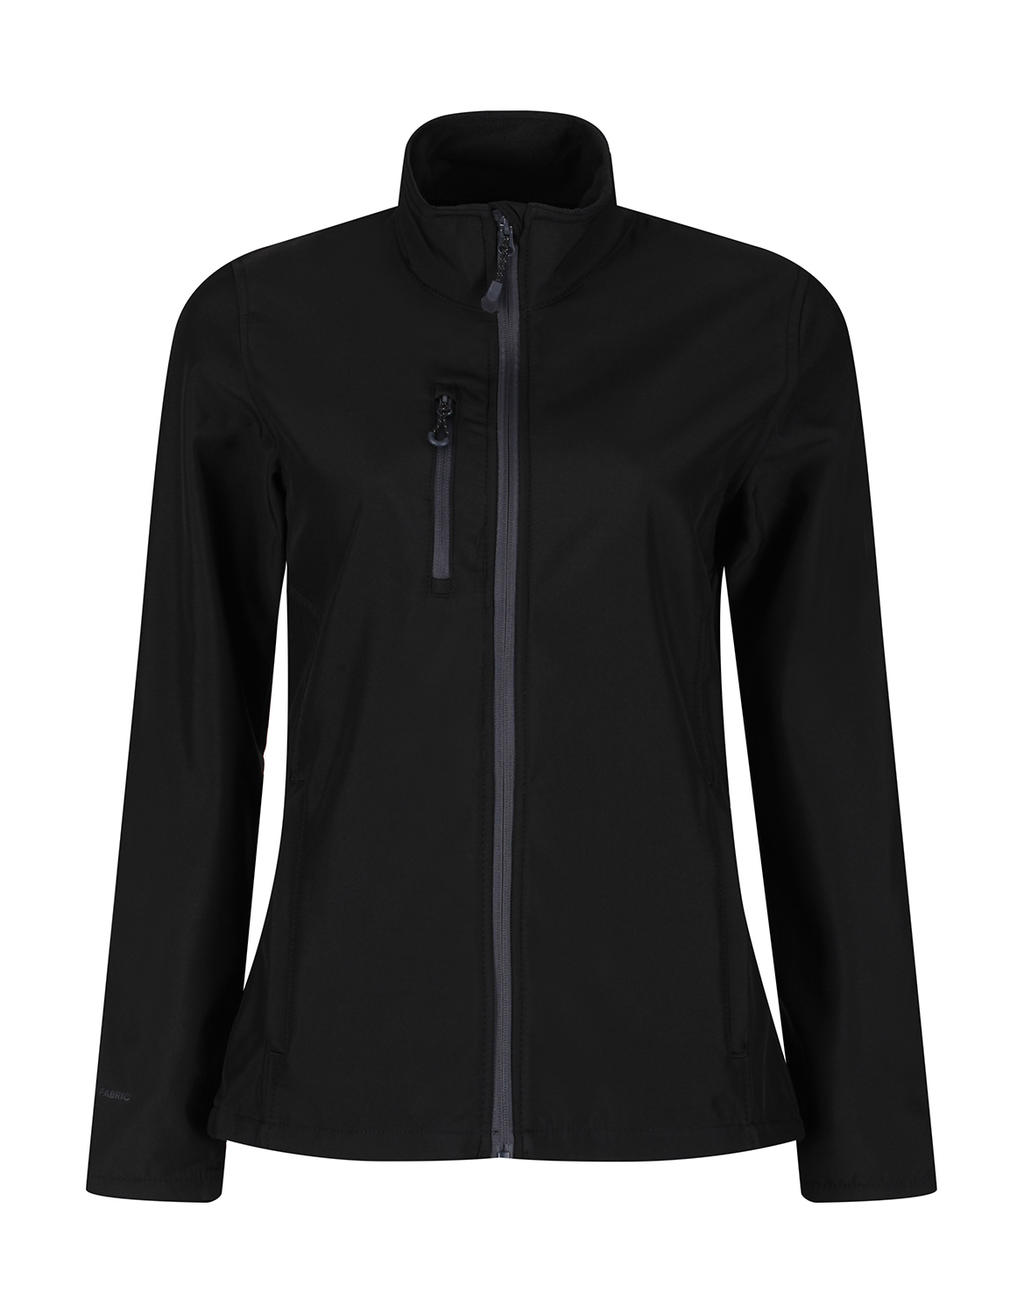 Women's Honestly Made Recycled Softshell Jacket